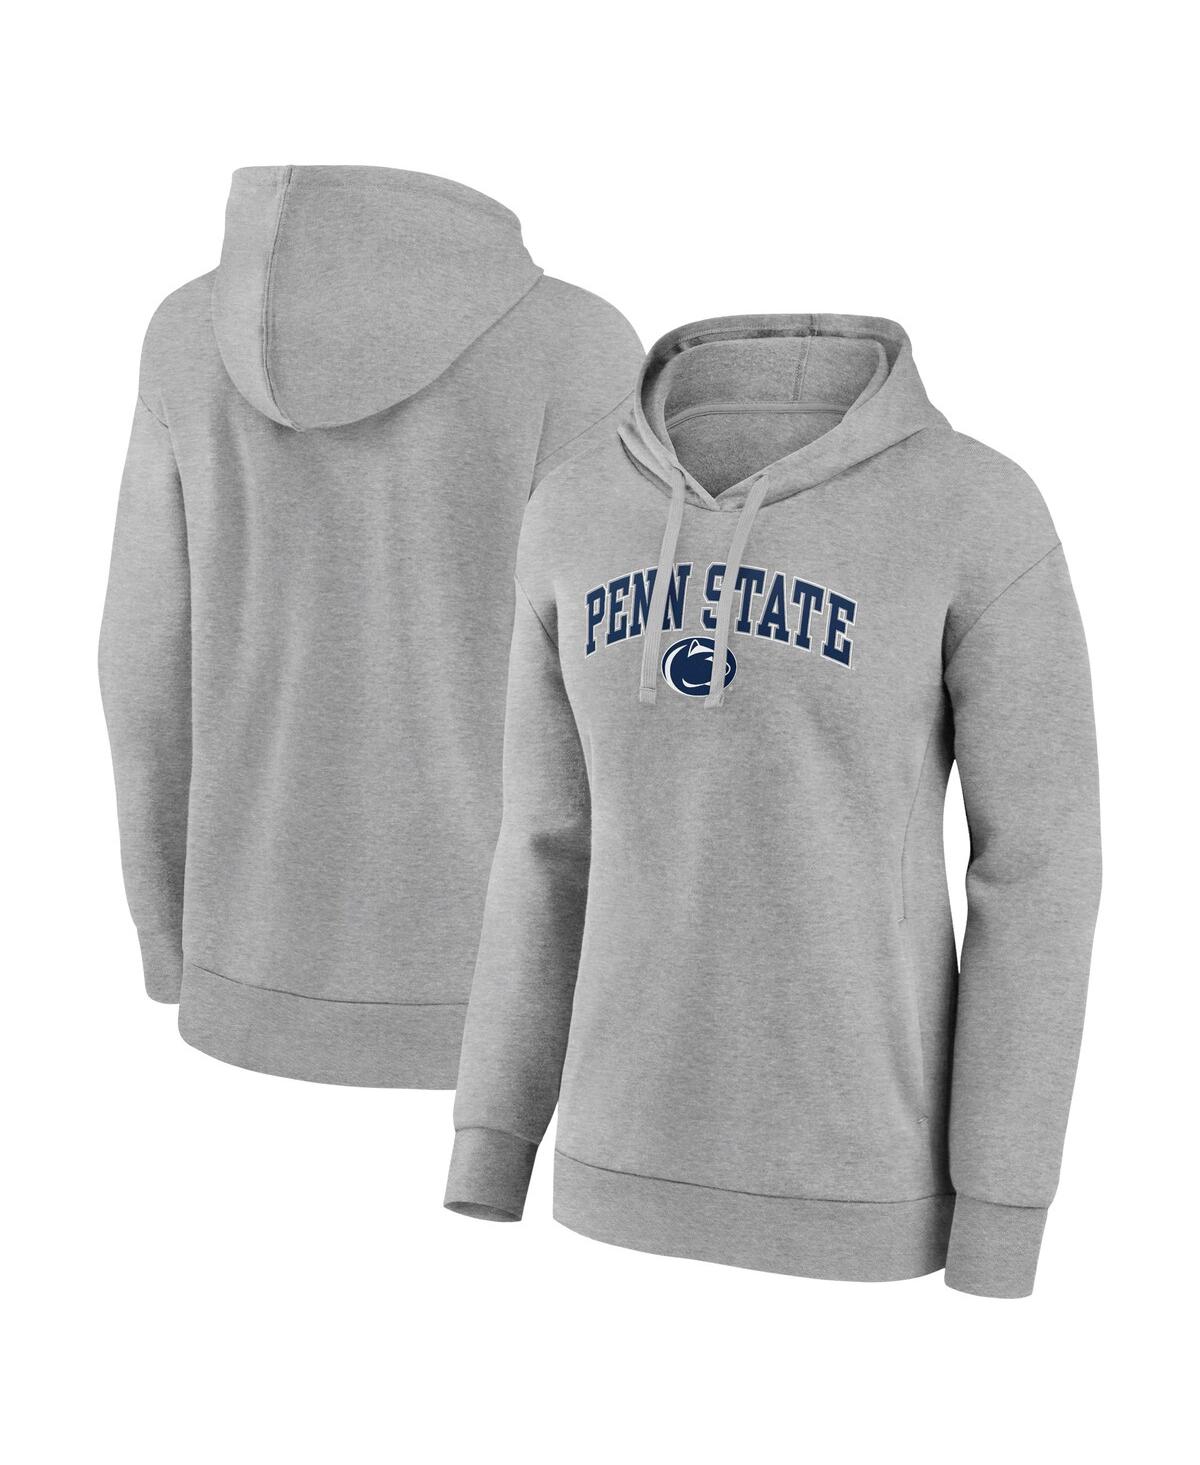 Women's Fanatics Heather Gray Penn State Nittany Lions Evergreen Campus Pullover Hoodie - Heather Gray